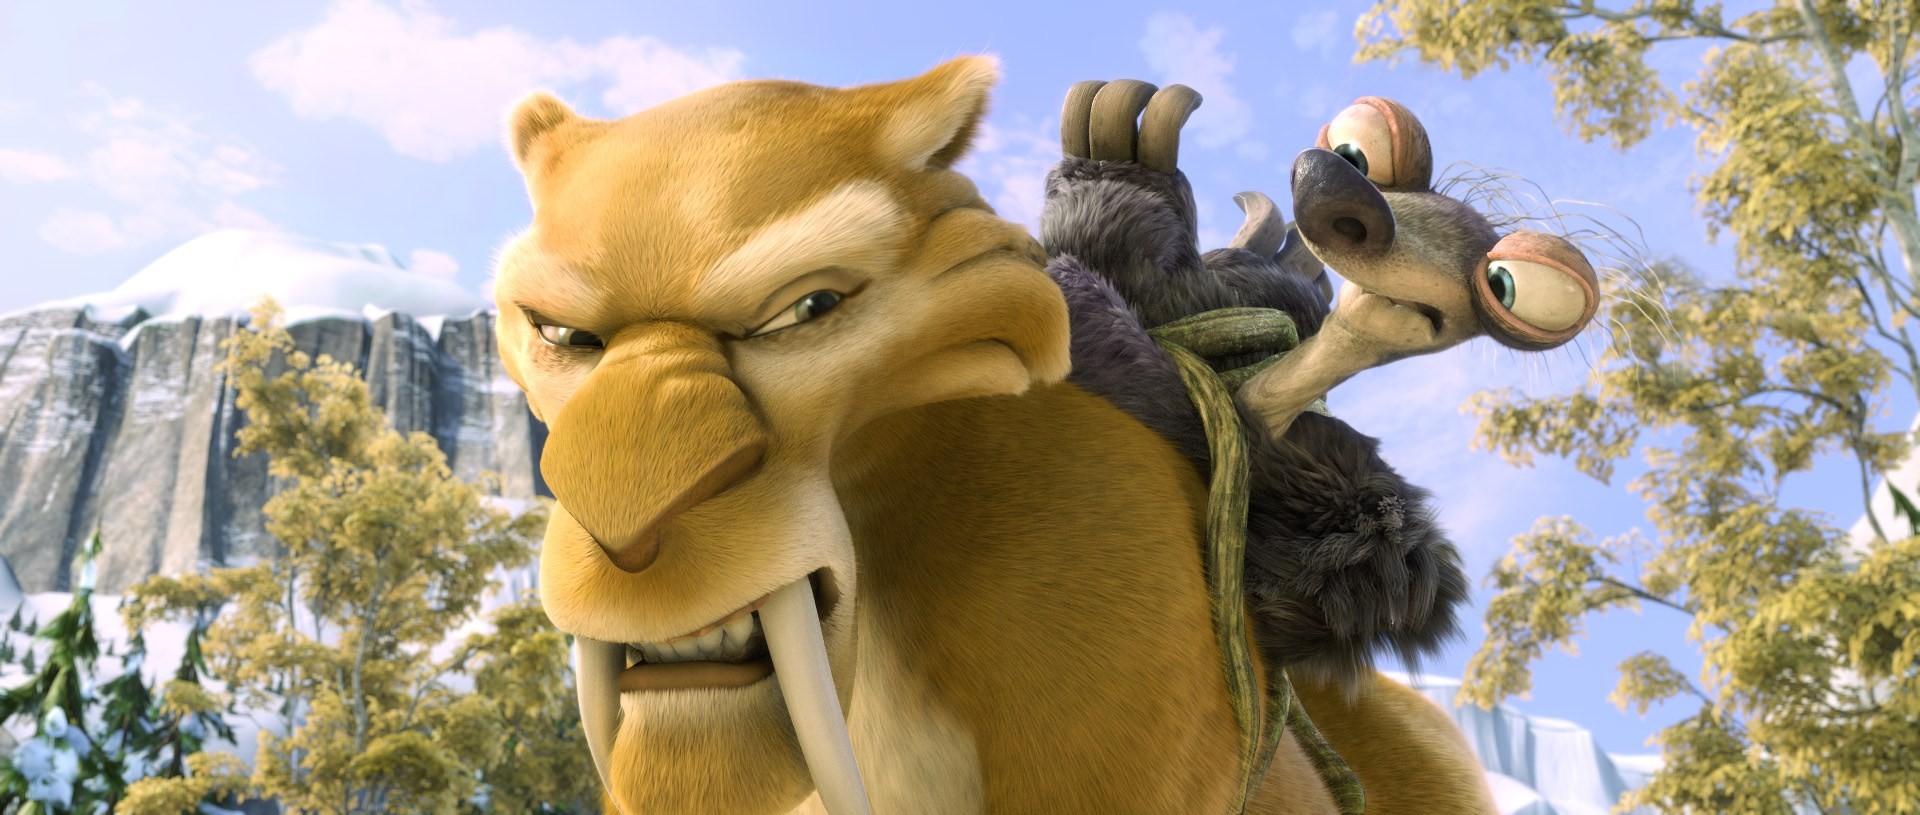 Diego and Granny from 20th Century Fox's Ice Age: Continental Drift (2012)